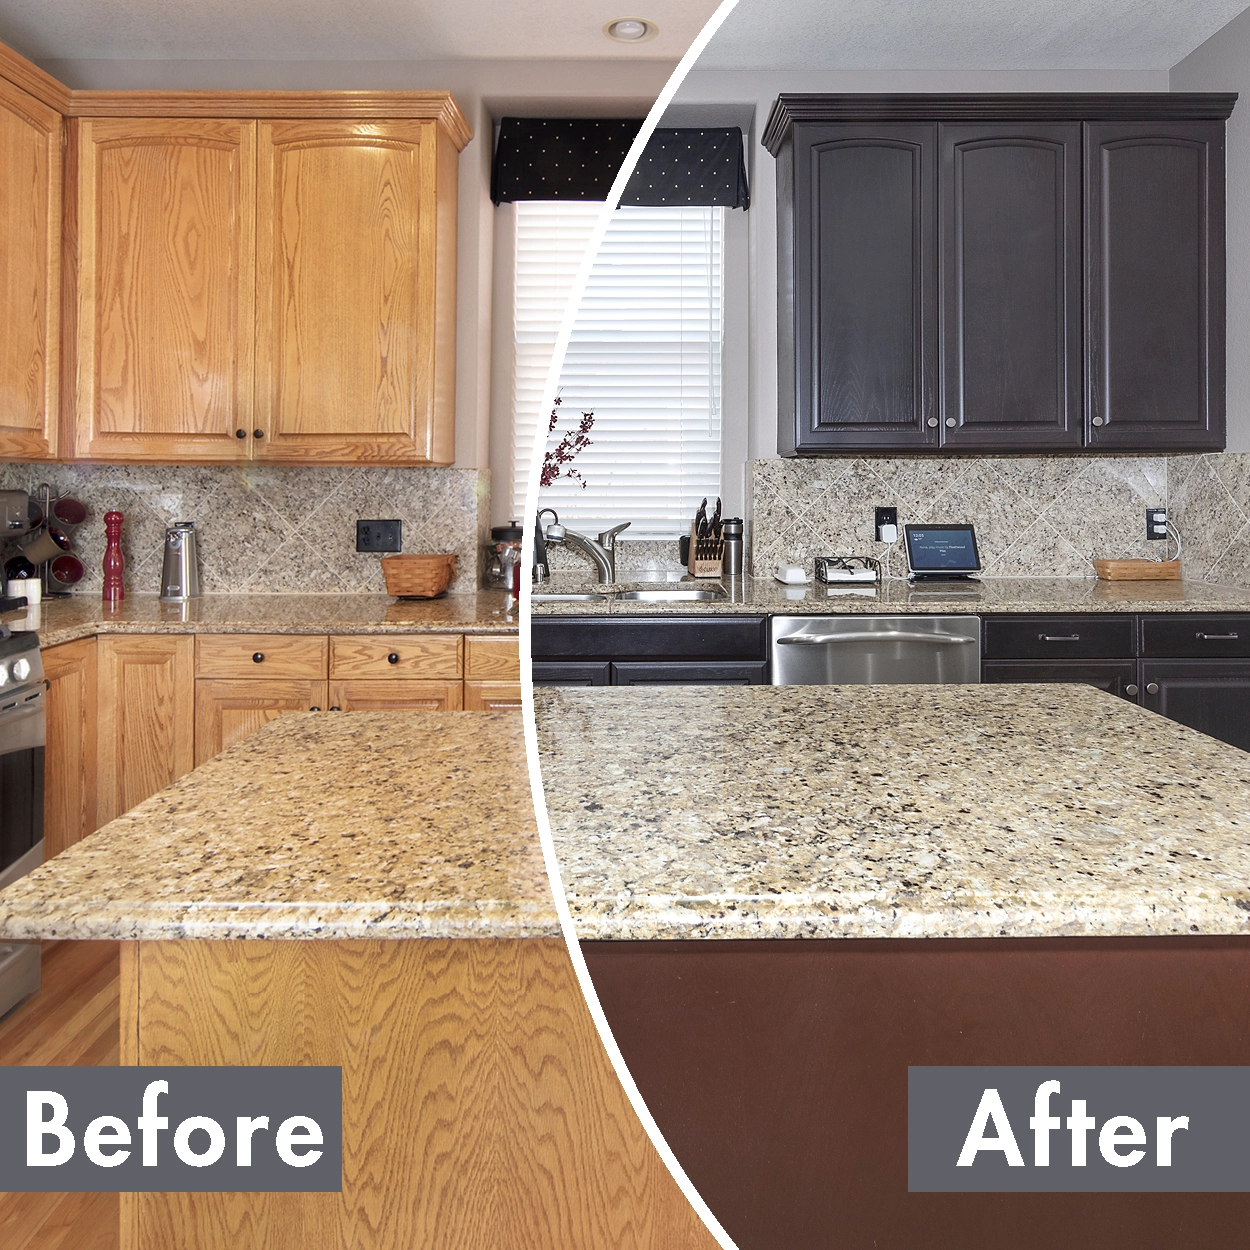 Cabinet Color Change N Hance, How To Change Stain Color On Kitchen Cabinets